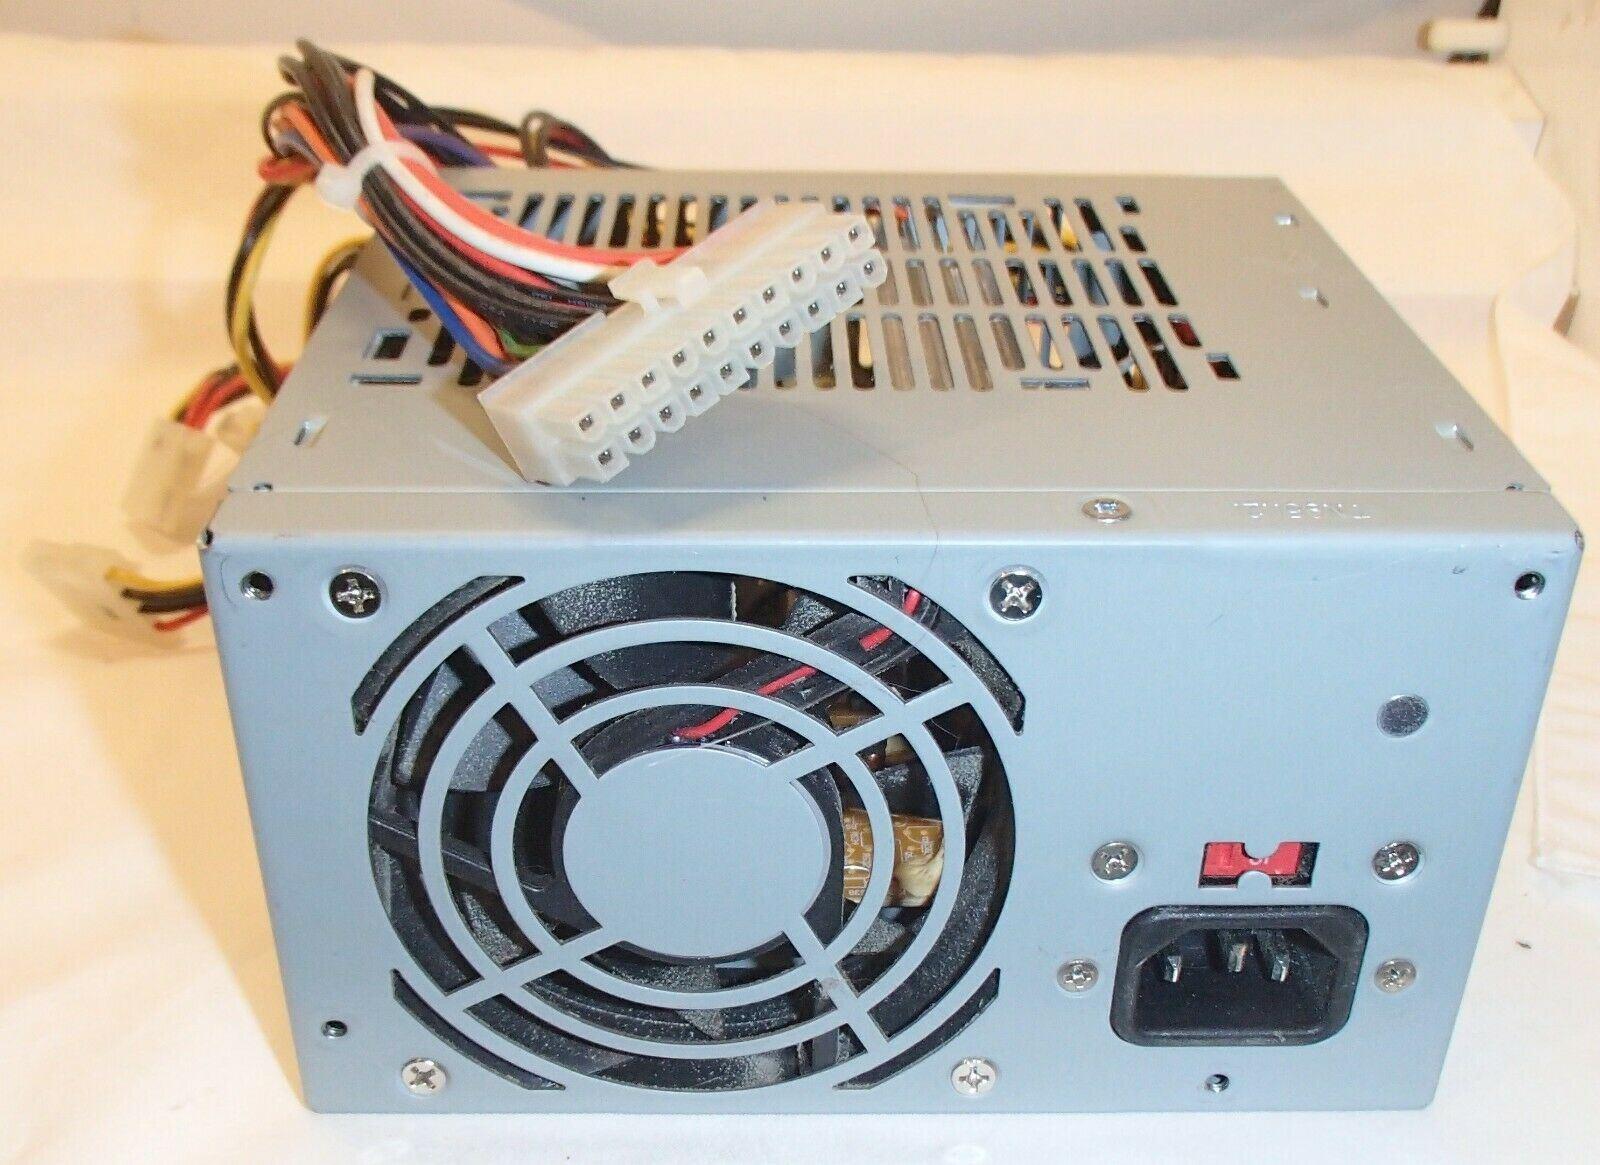 124848 001 127999 001 ps 6151 6c hp ps 6151 6c 145w power supply for deskpro ep